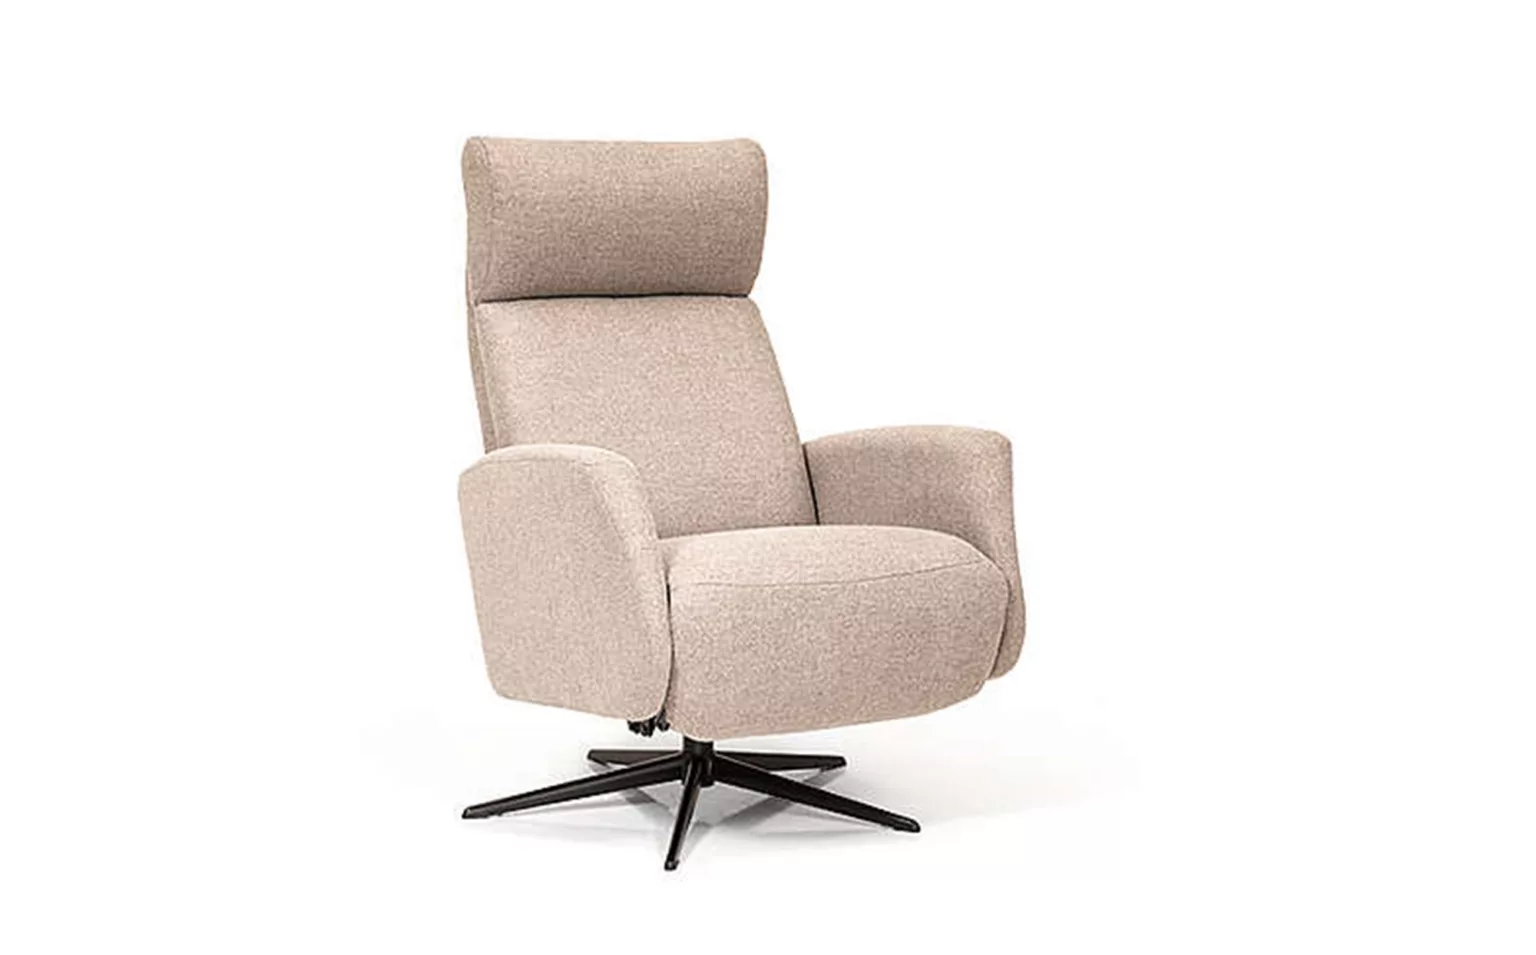 Comfy 8077 relaxfauteuil stof